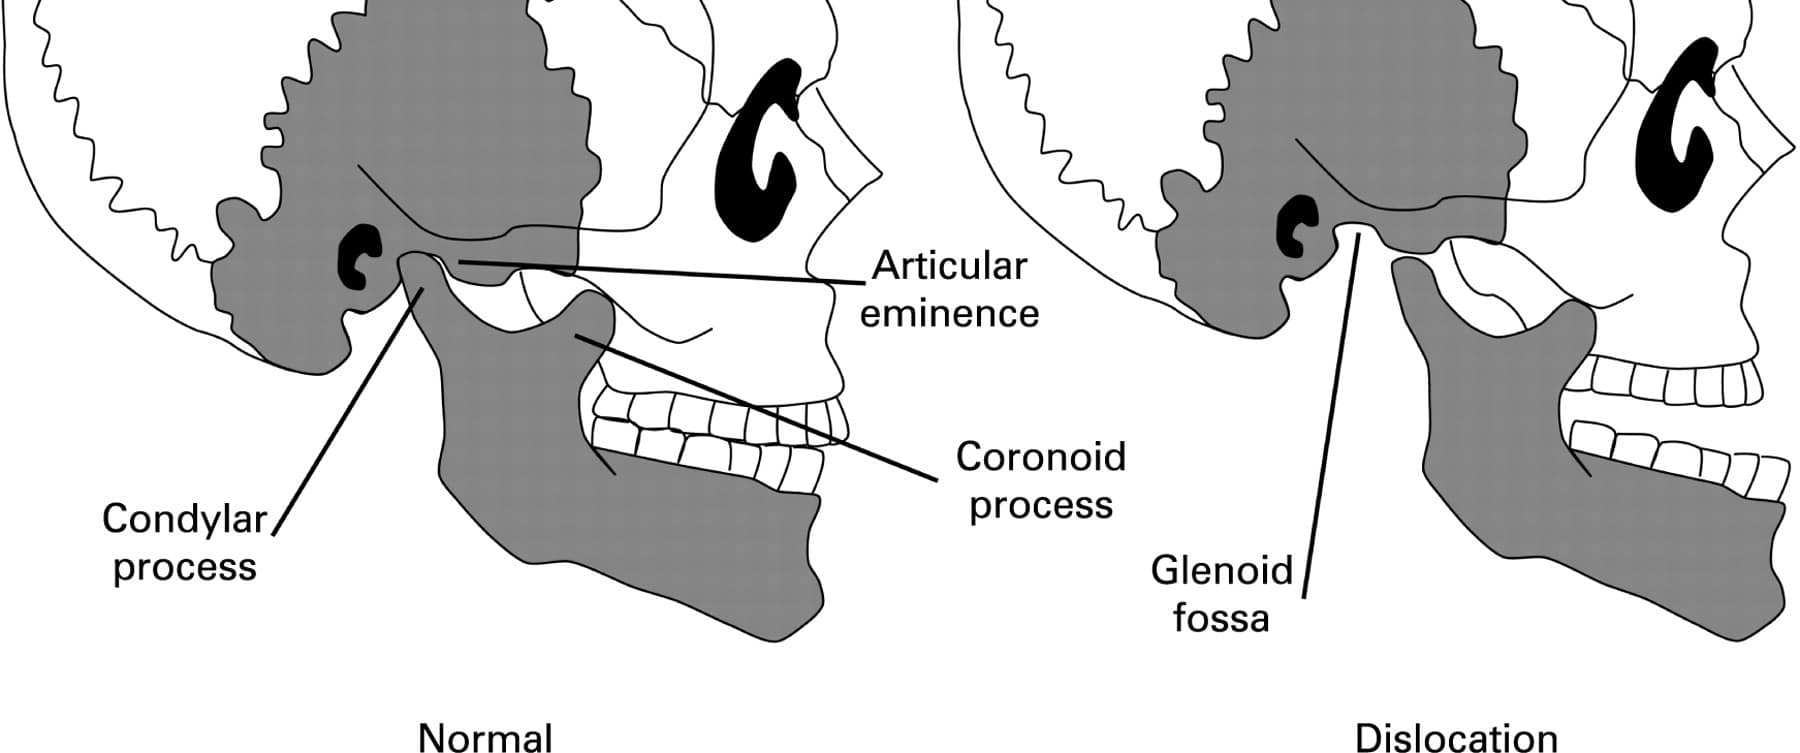 Diagram of skull indicating jaw dislocation| Featured image for Dislocation Treatment service at Pivotal Motion.